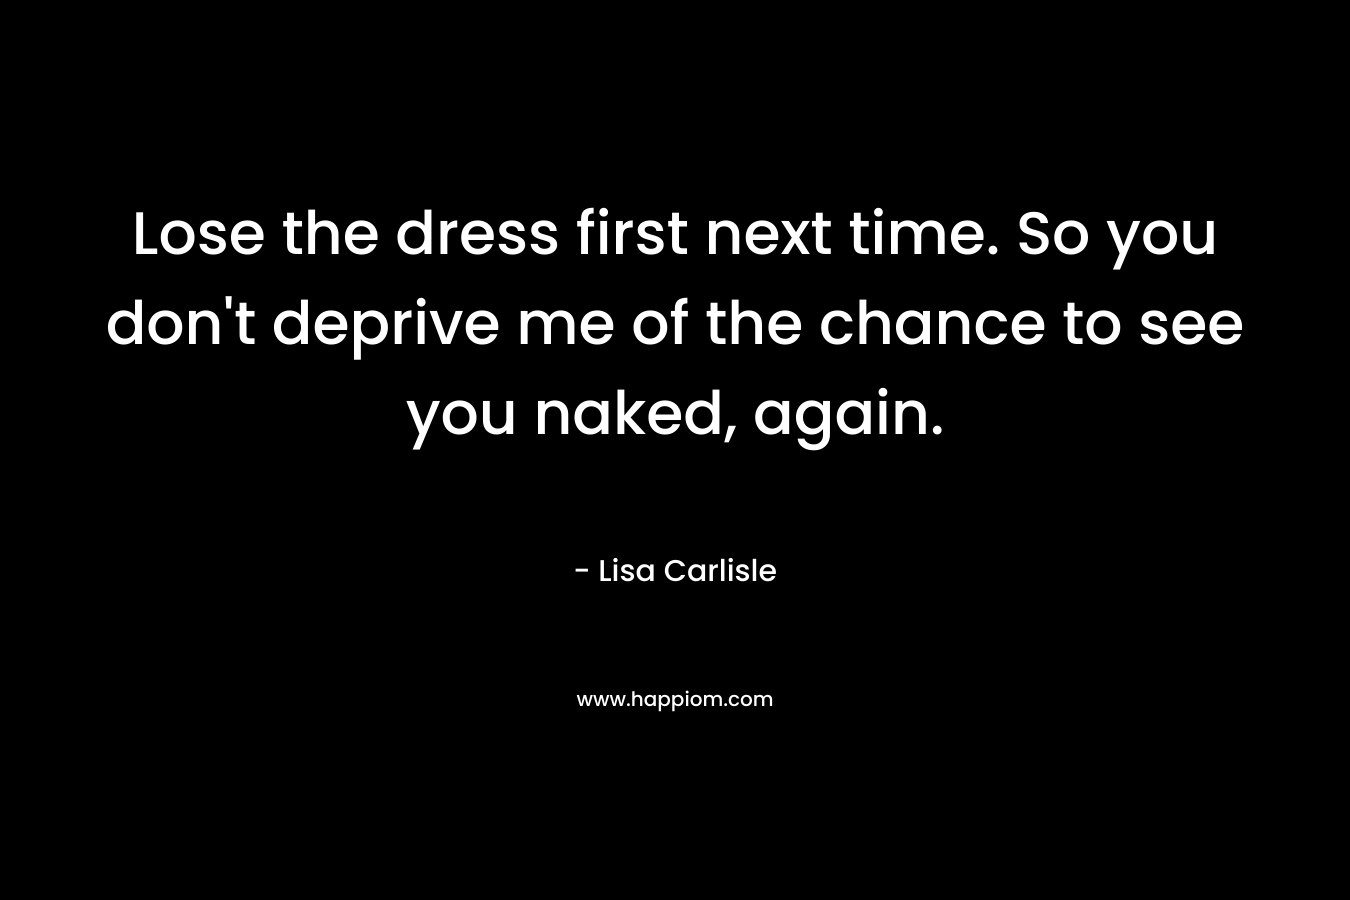 Lose the dress first next time. So you don't deprive me of the chance to see you naked, again.